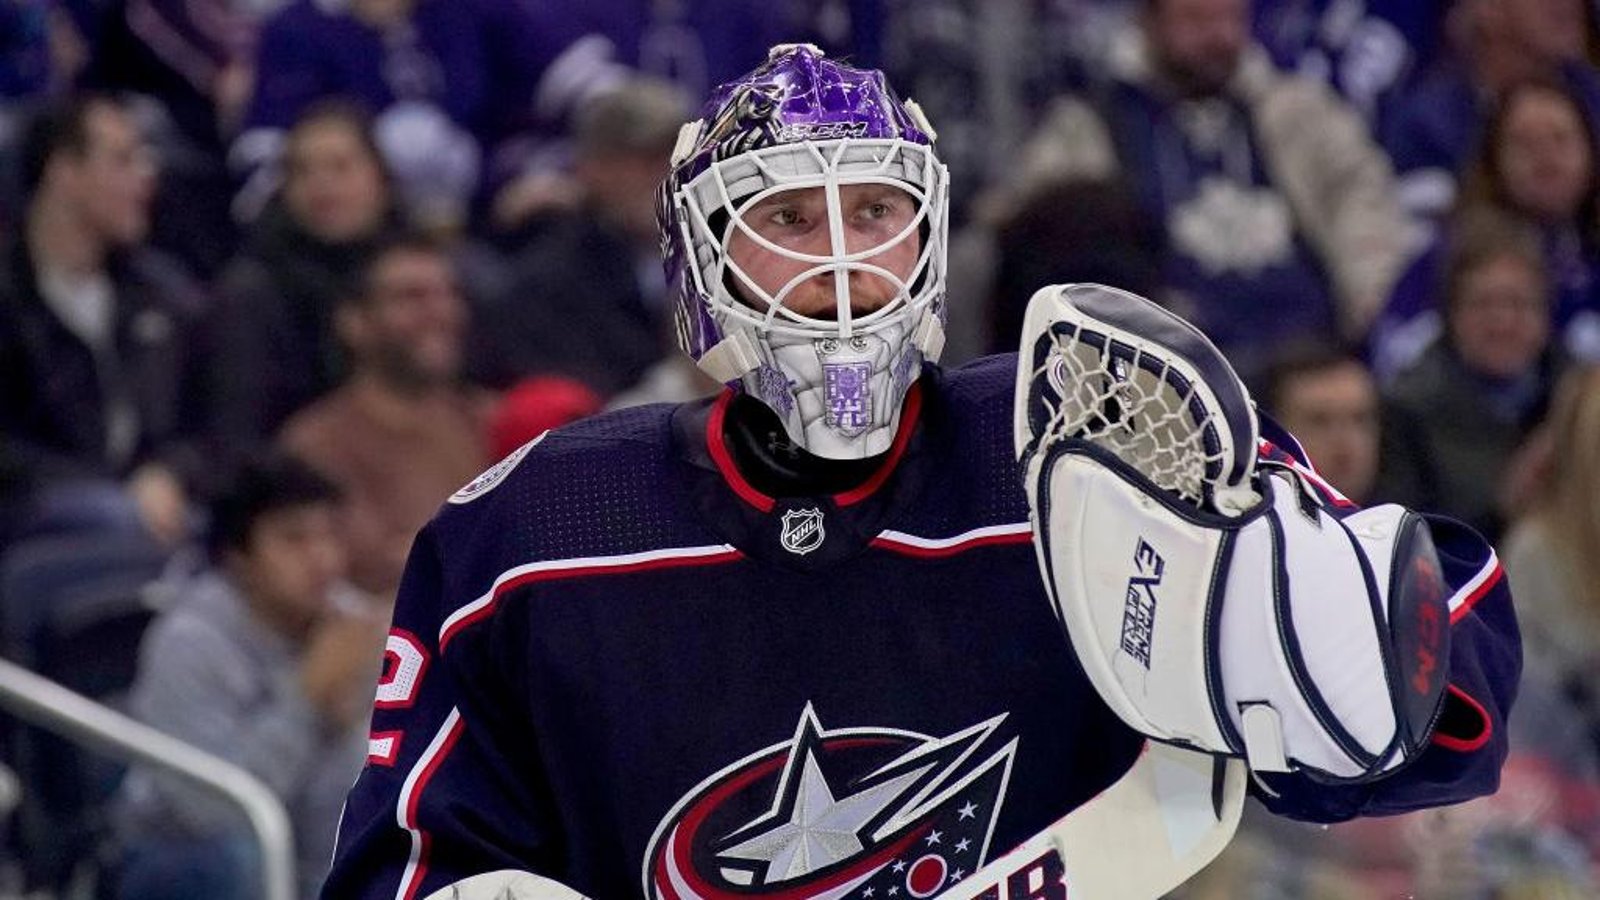 Breaking: Bobrovsky asked to waive his no-move clause after “incident”?!